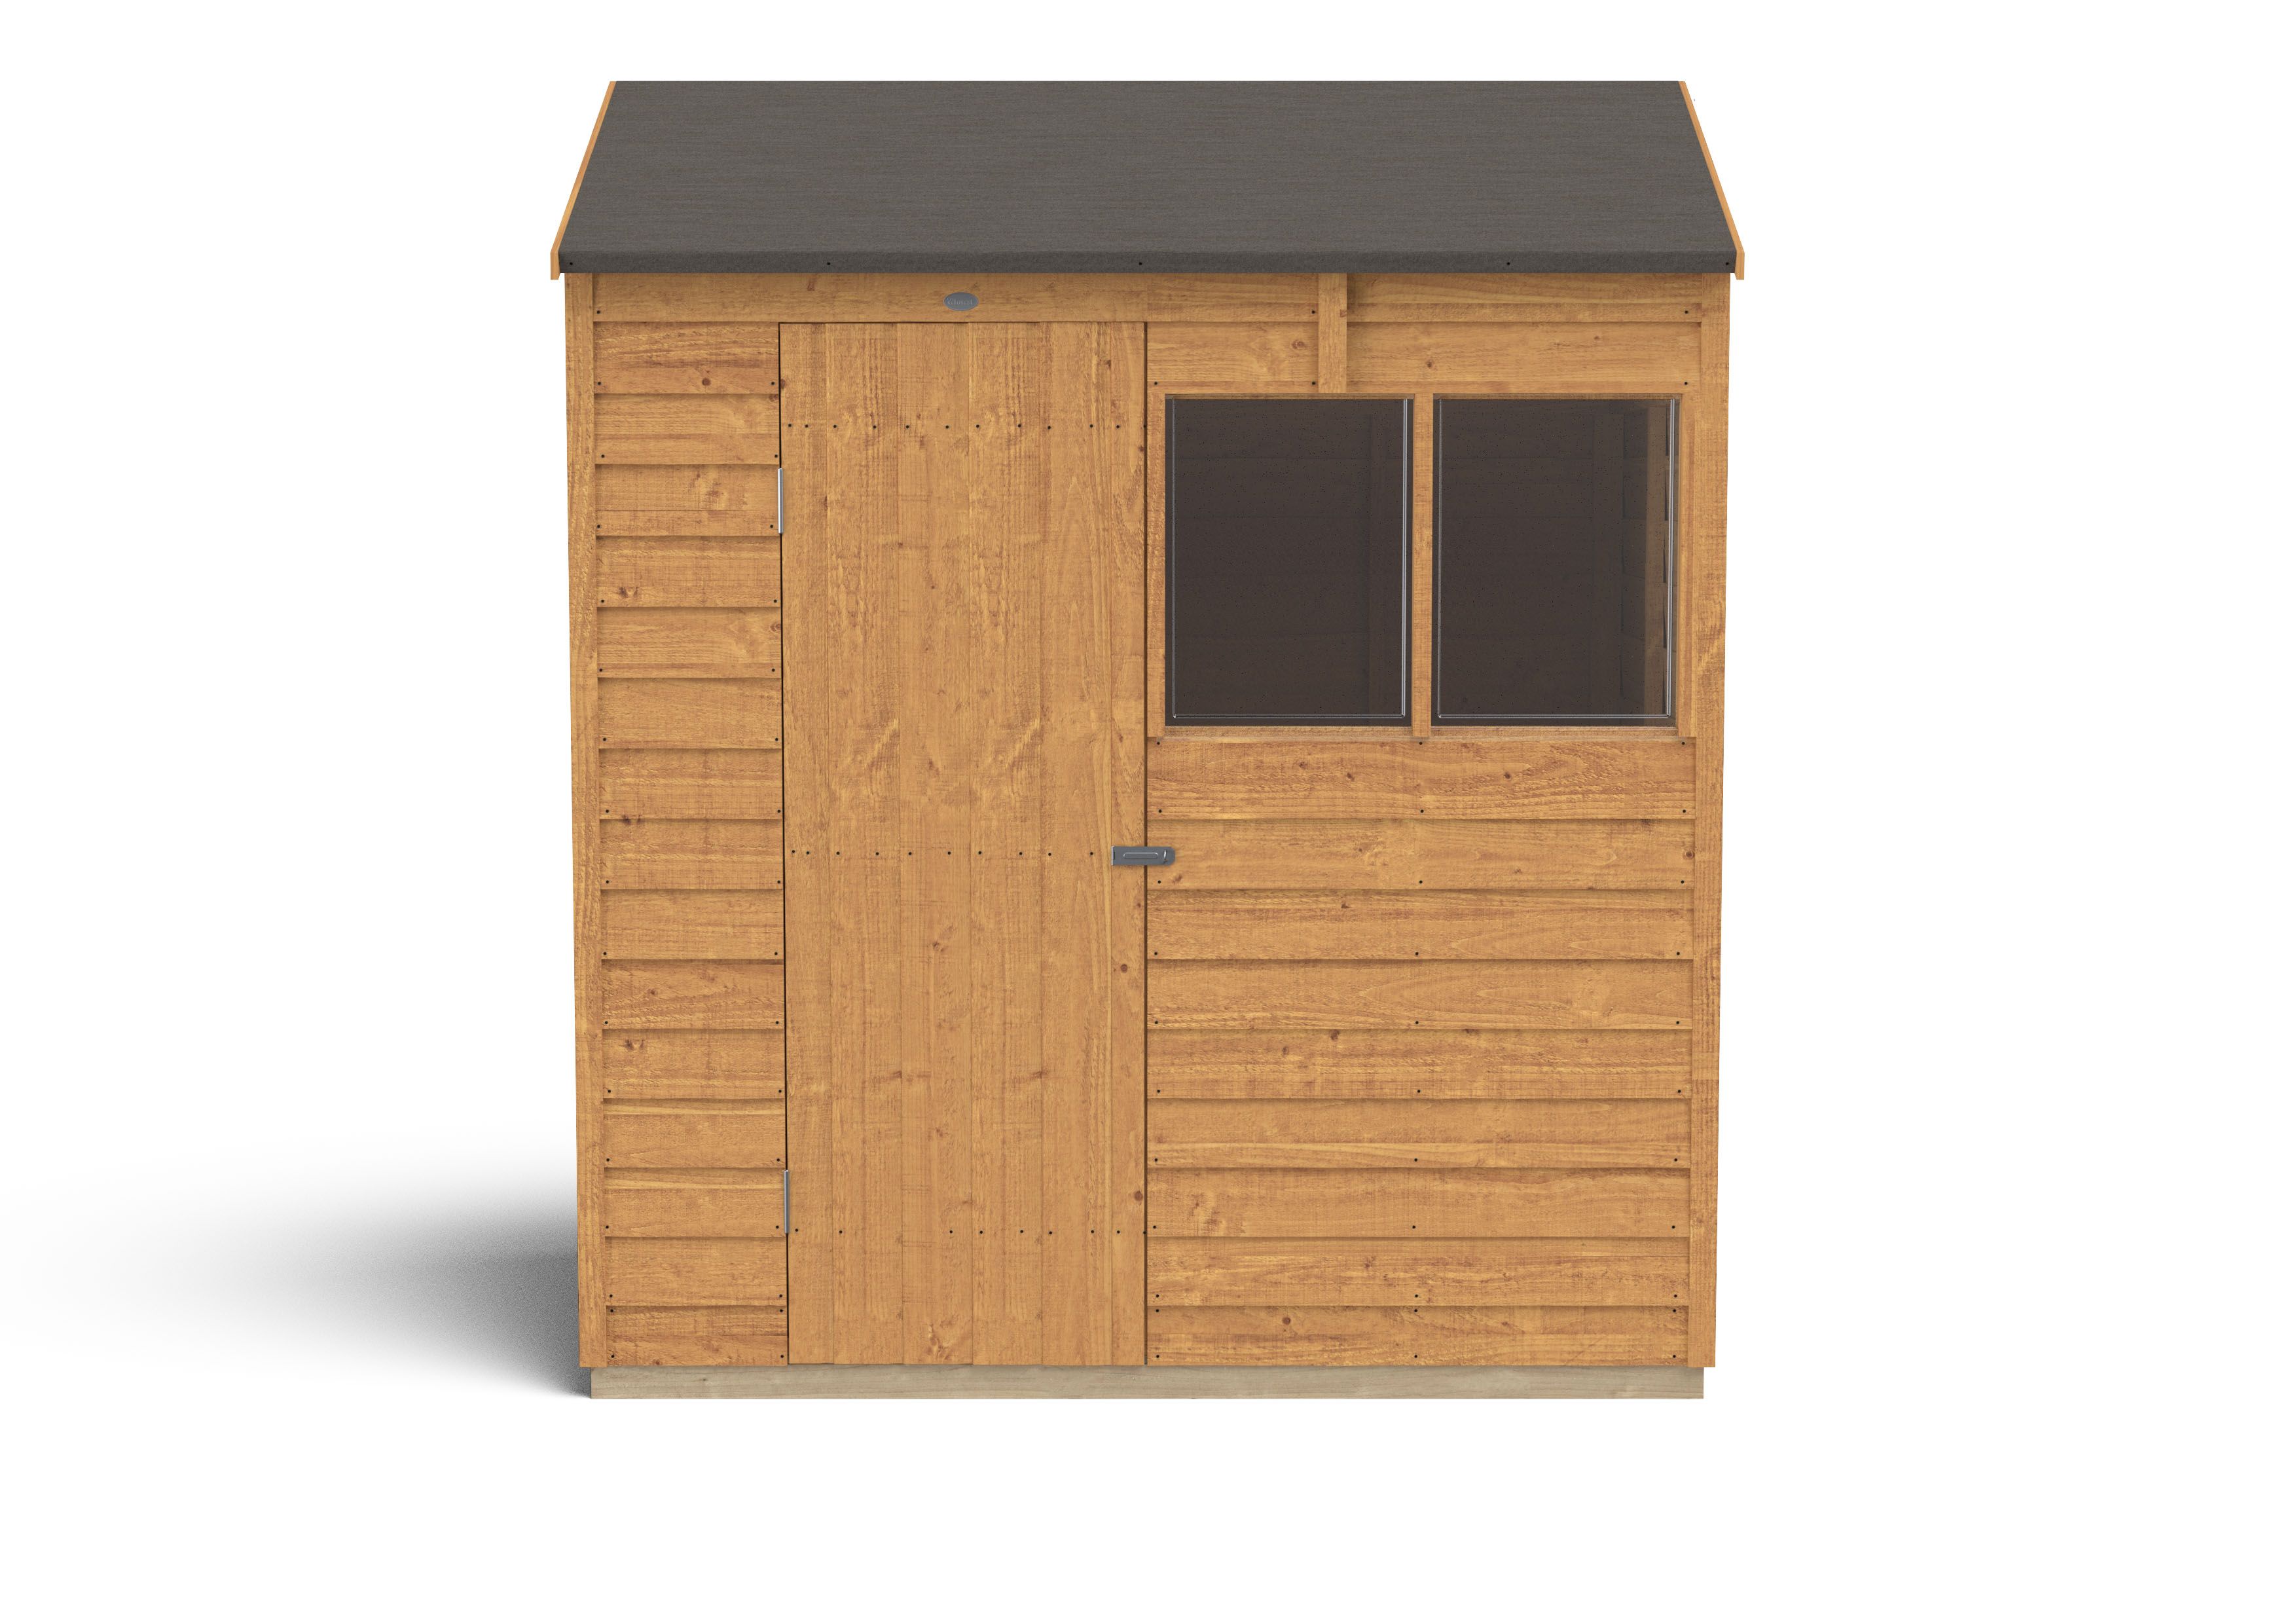 Forest Garden Overlap 6x4 ft Reverse apex Wooden Dip treated Shed with floor & 2 windows (Base included)